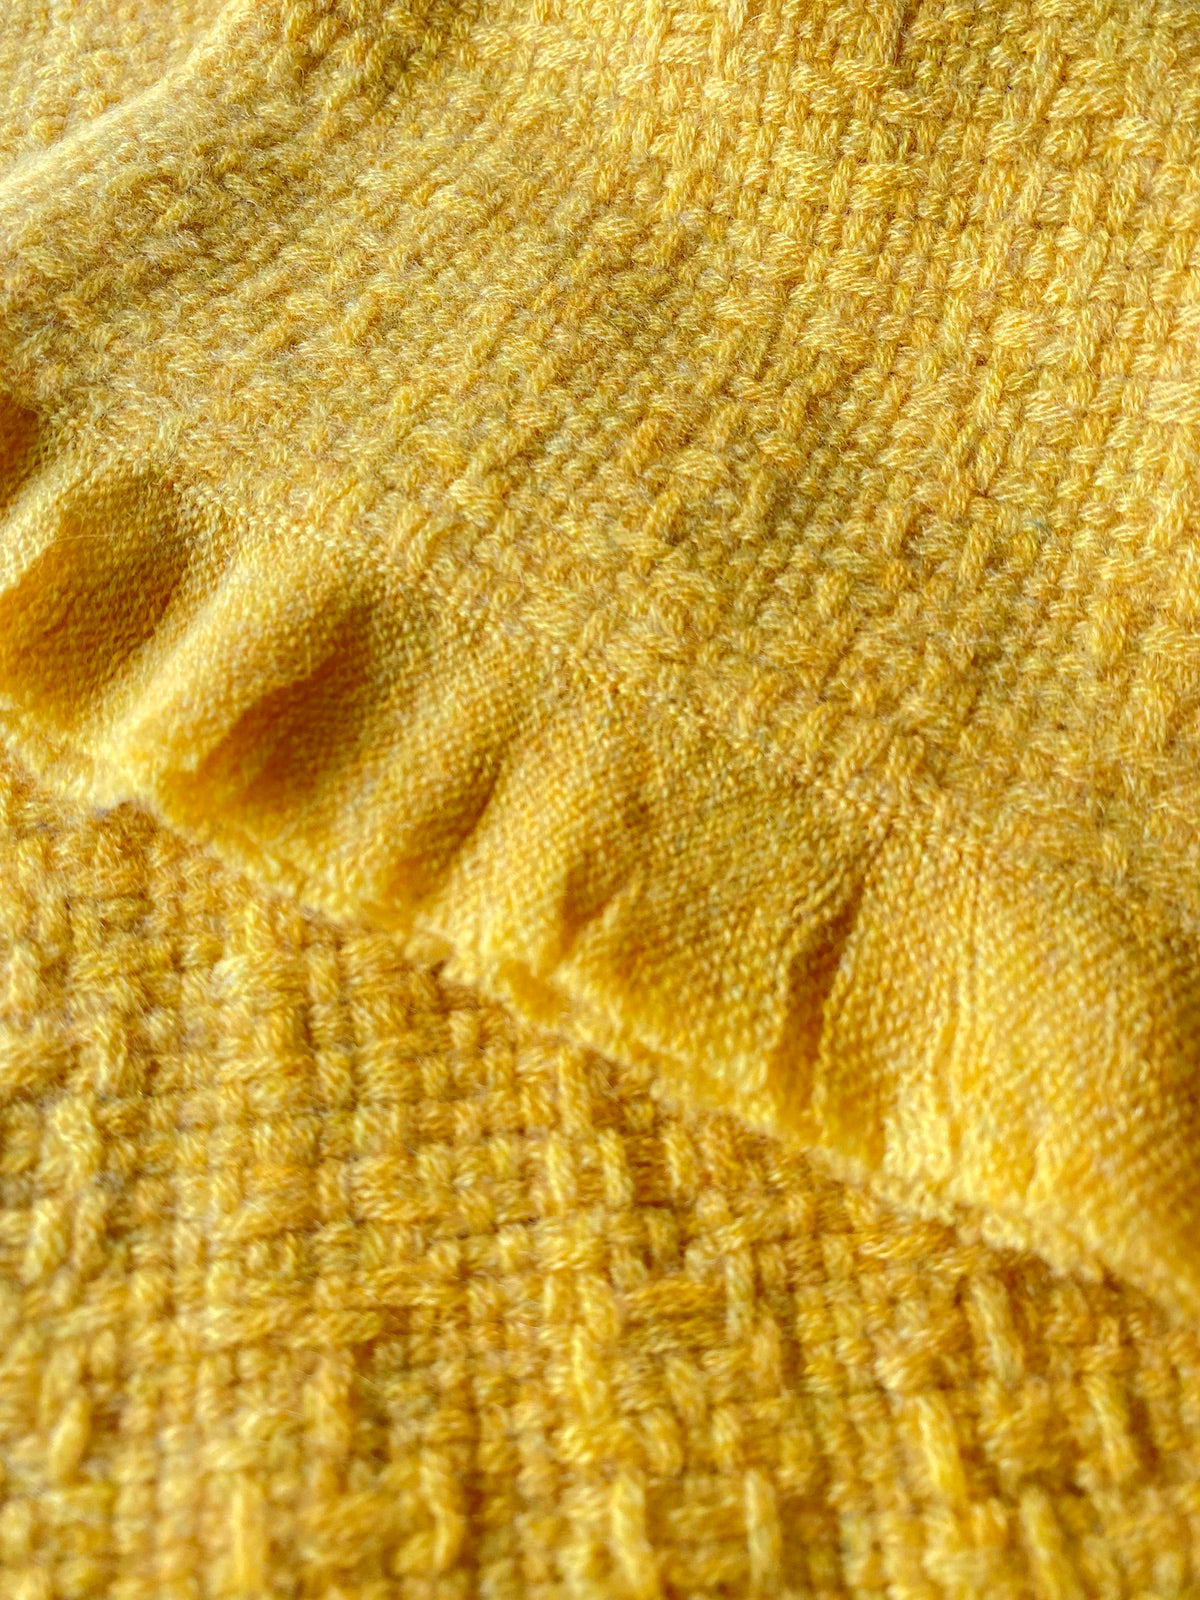 Super soft cashmere long scarf - Mineral Yellow